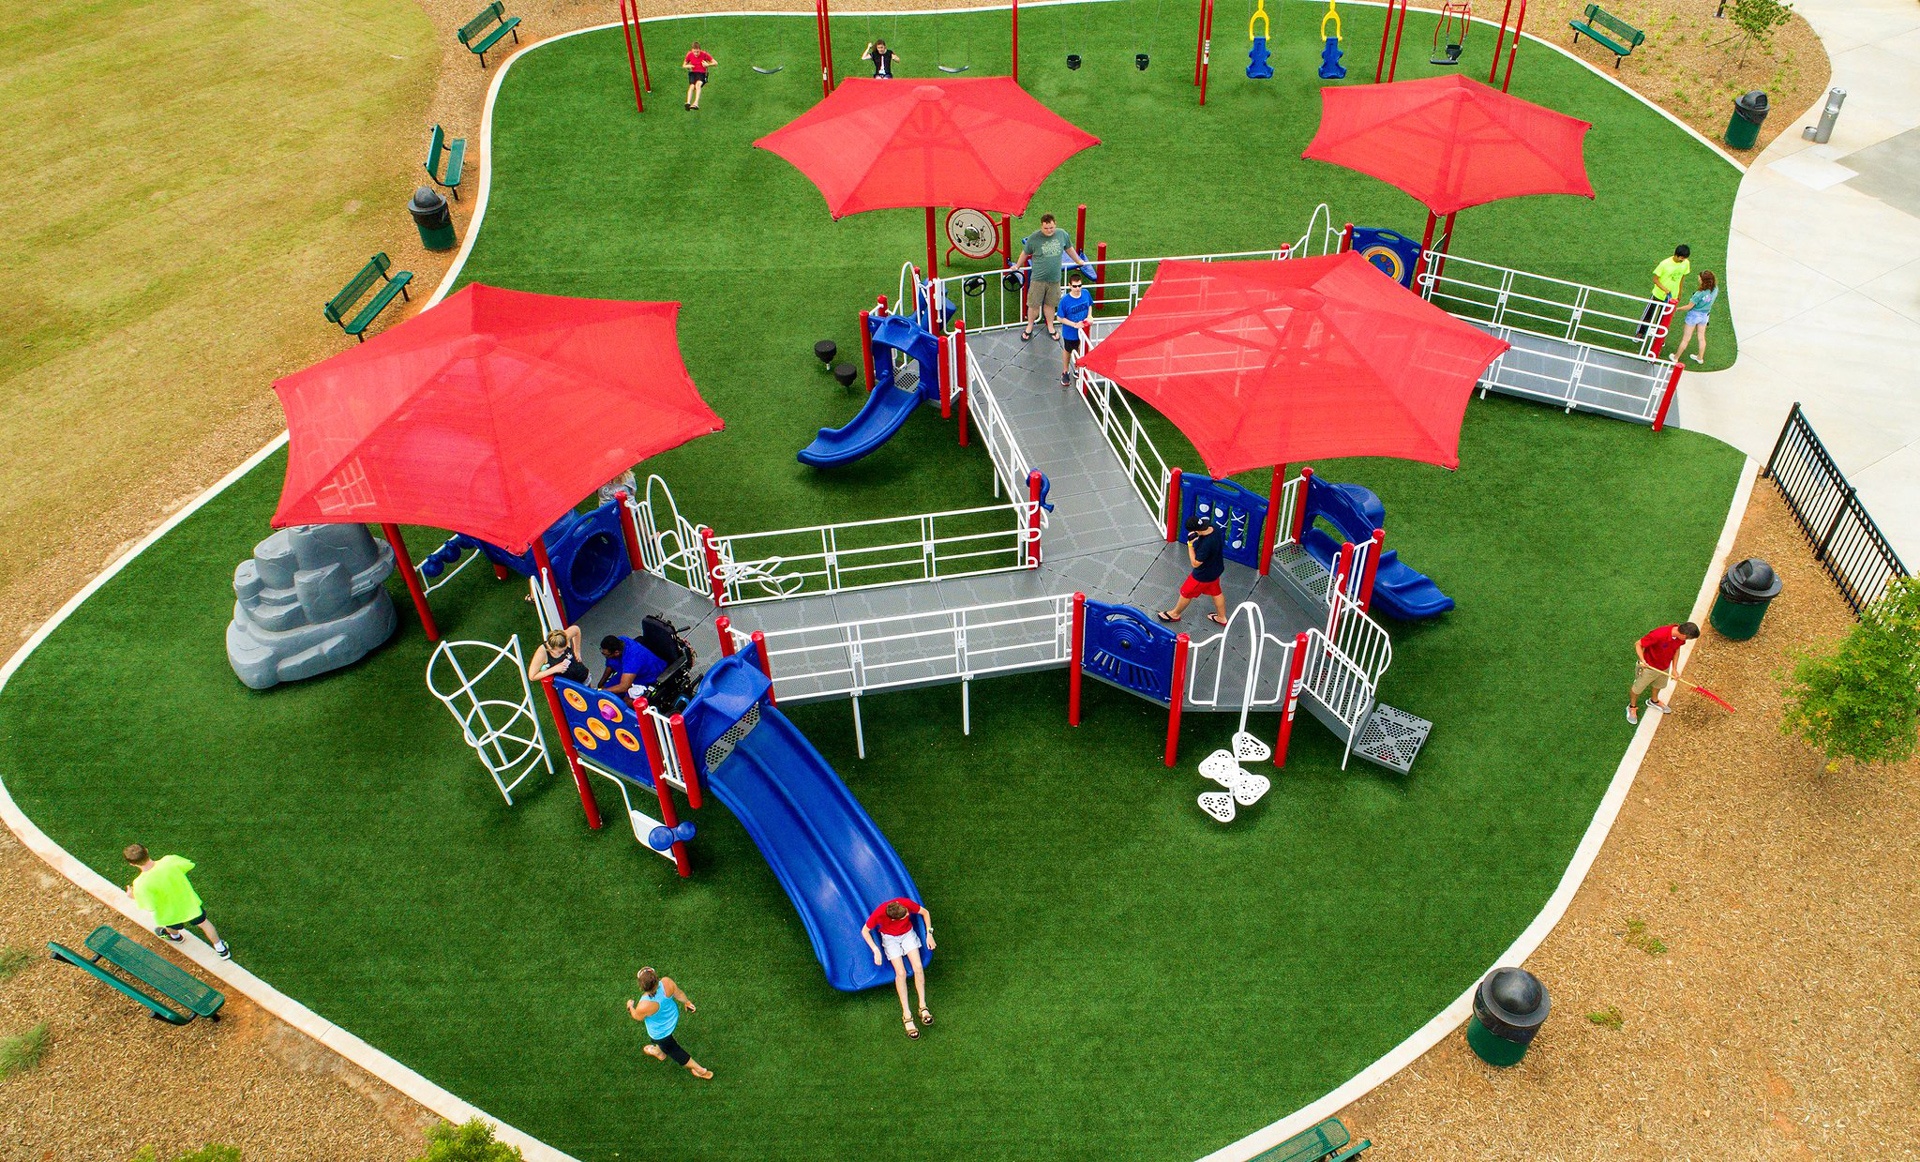 Inclusive Playground Designs Based on Research